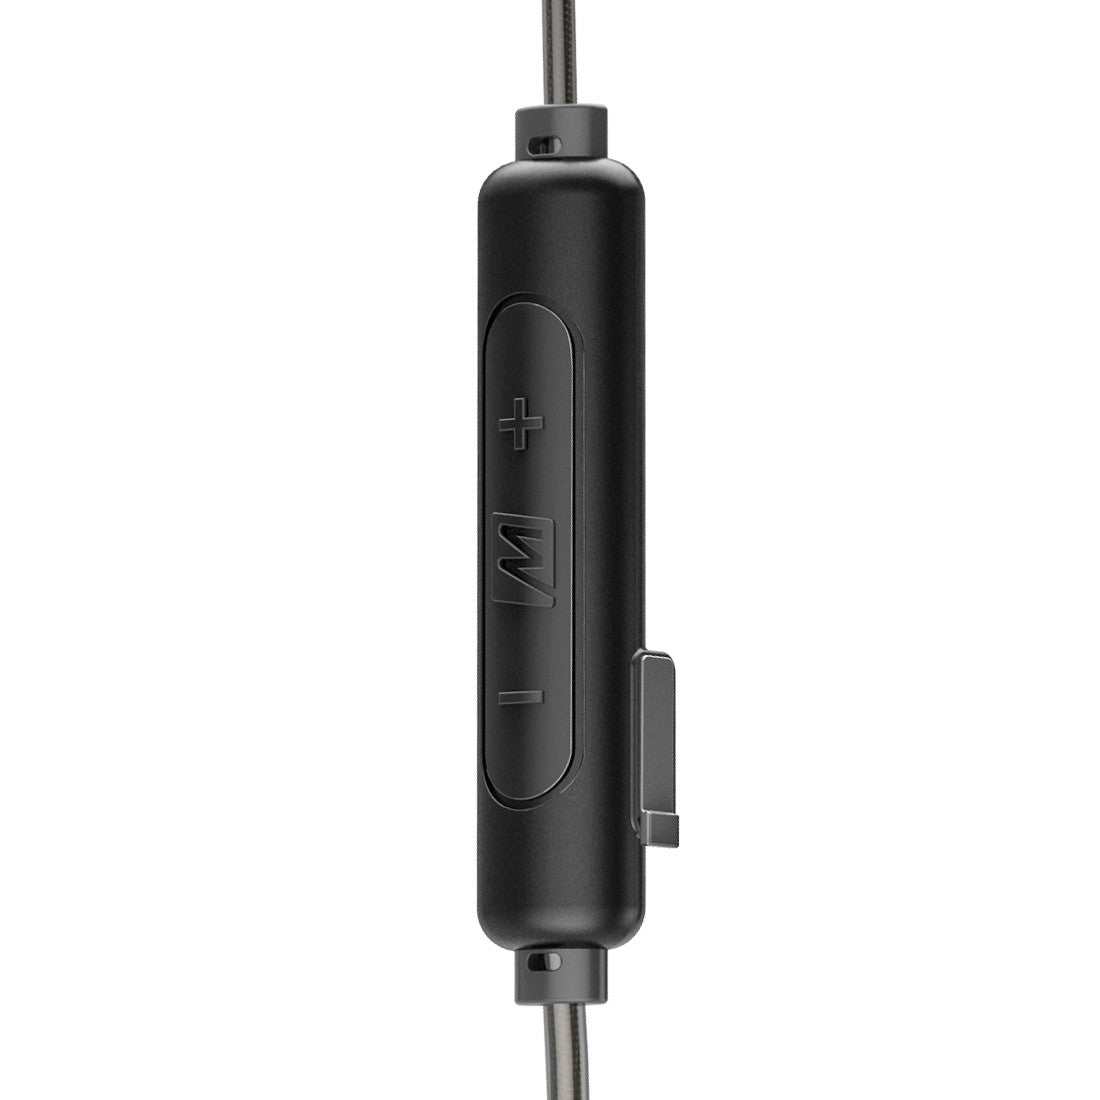 Image of BTX2 Bluetooth Wireless Adapter Cable for MMCX In Ear Monitors.